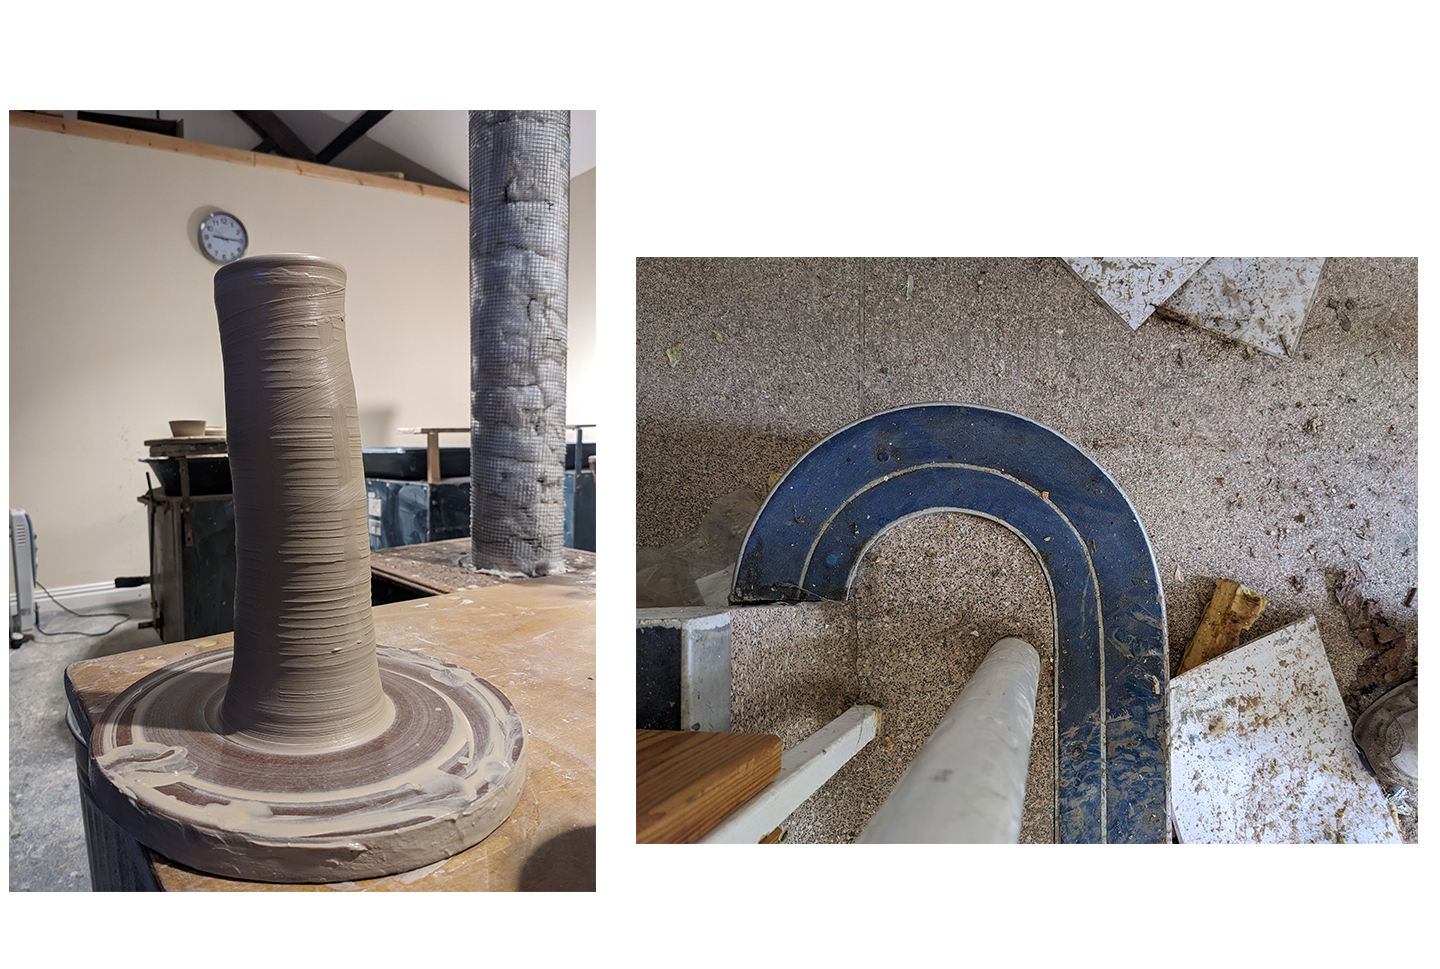 Two photos are side by side. On the left: a very wonky, tall vase shape in wet clay. To the right: a modernist curve detail on a stair in an old hospital, flopping in an exaggerated version of the wonky pot, as if it's mocking it.